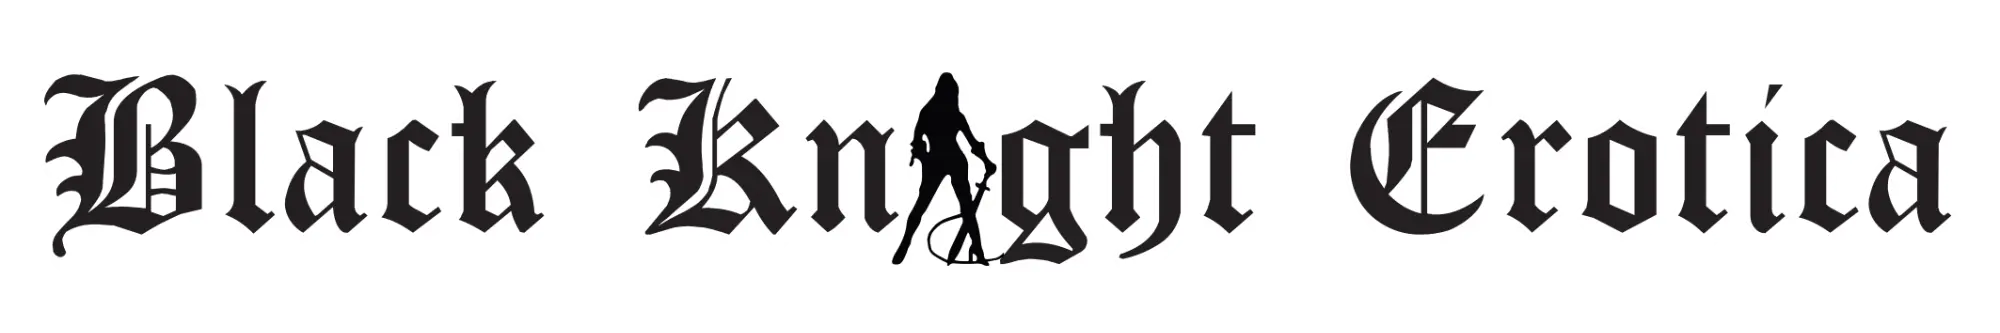 Black Knight Erotica Logo with Gothic font and Girl as the letter i in the word knight.